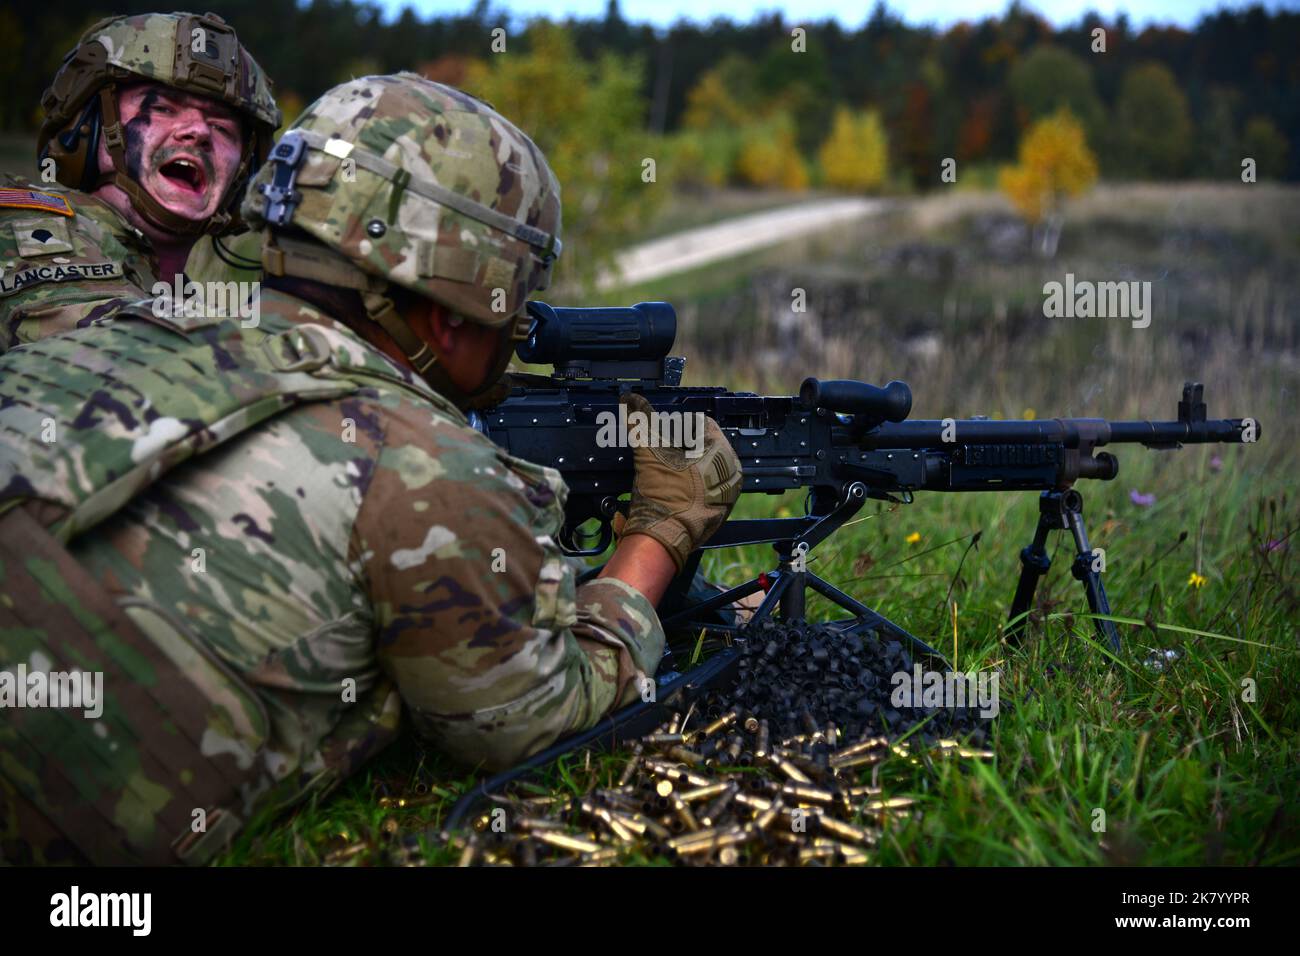 U.S. Army Spc. Jacob Lancaster, an assistant M240b gunner assigned to Bull Troop, 1st Squadron, 2nd Cavalry Regiment calls out for more ammunition during a live support by fire training at the Grafenwoehr Training Area, Germany, Oct. 16, 2022. 2nd Cavalry Regiment provides V Corps, America’s forward-deployed corps in Europe, with combat-credible forces capable of rapid deployment throughout the European theater to defend the NATO alliance. (U.S. Army photo by Kevin Sterling Payne) Stock Photo